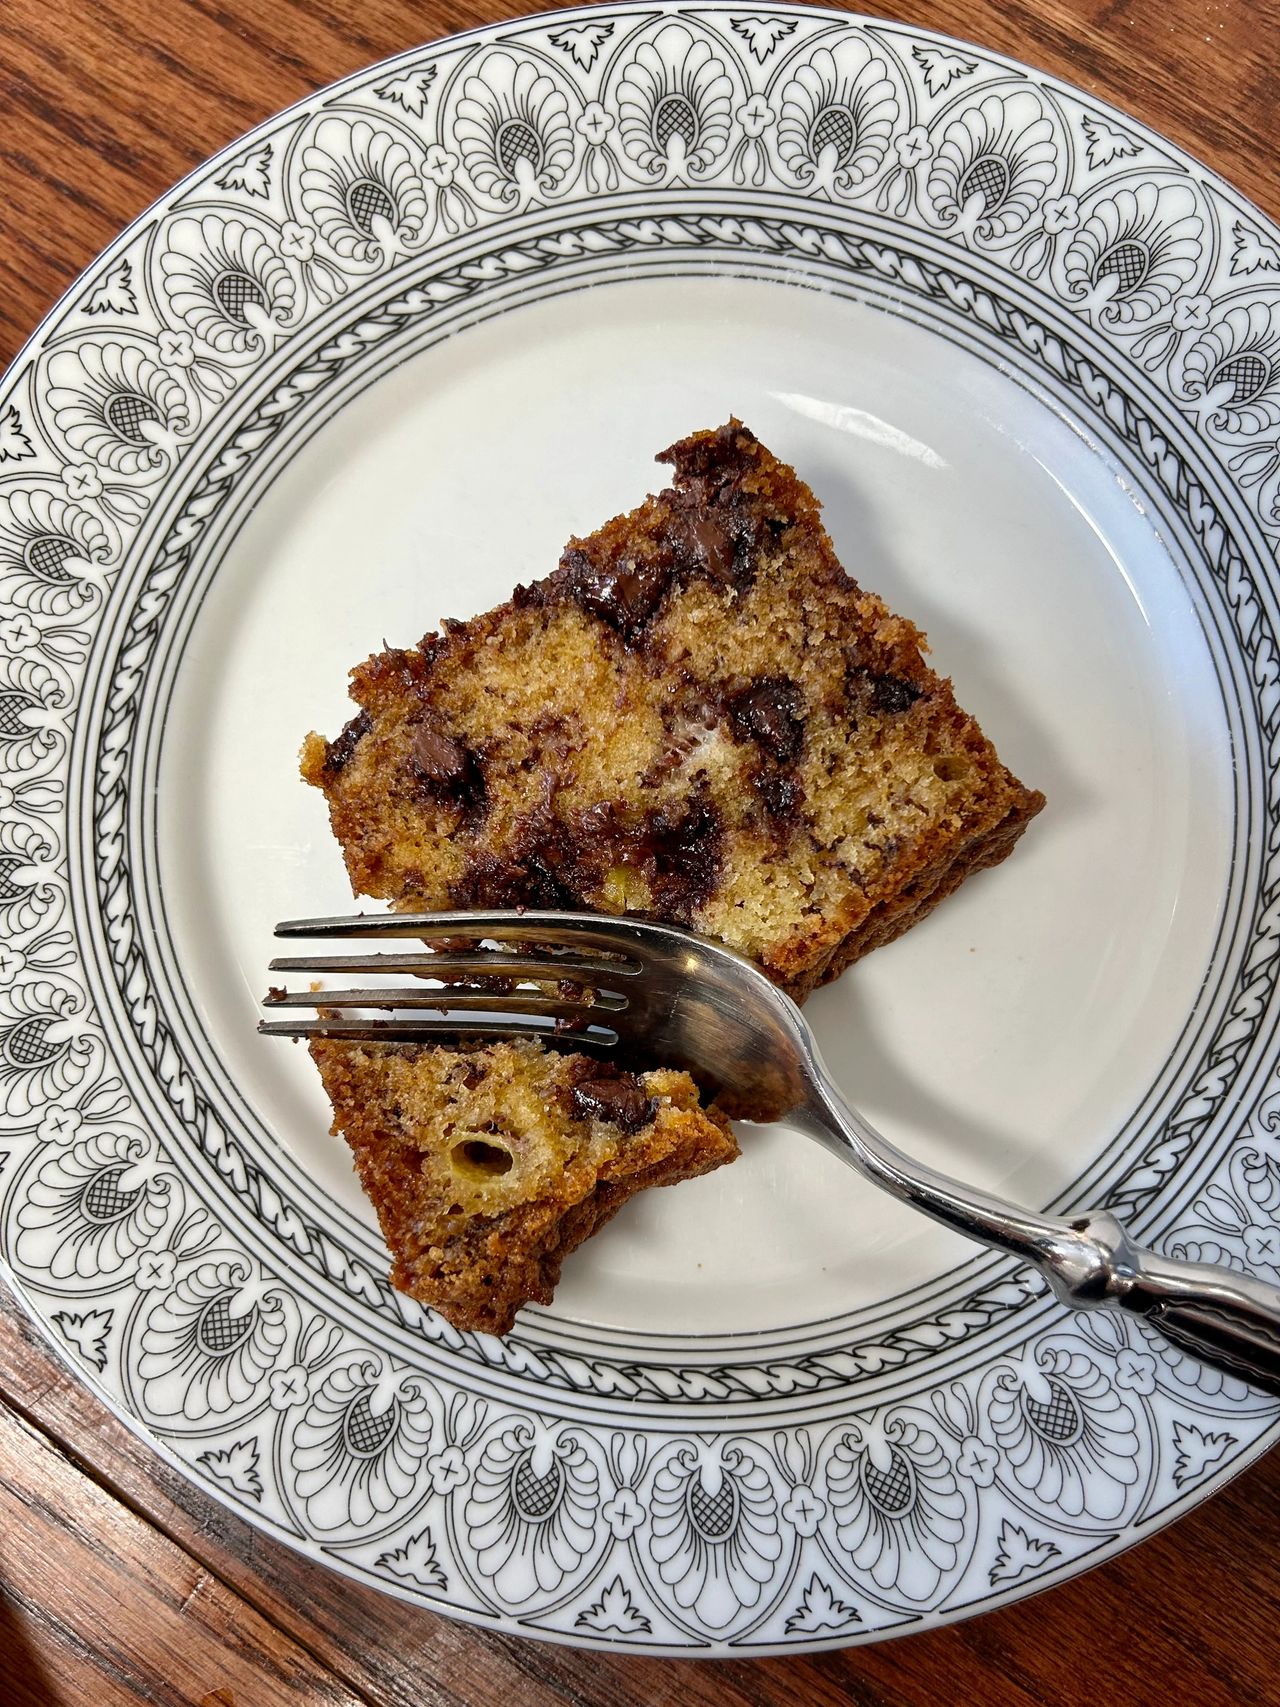 Piece of chocolate chip banana bread from Renny Darling cookbook sitting on a plate